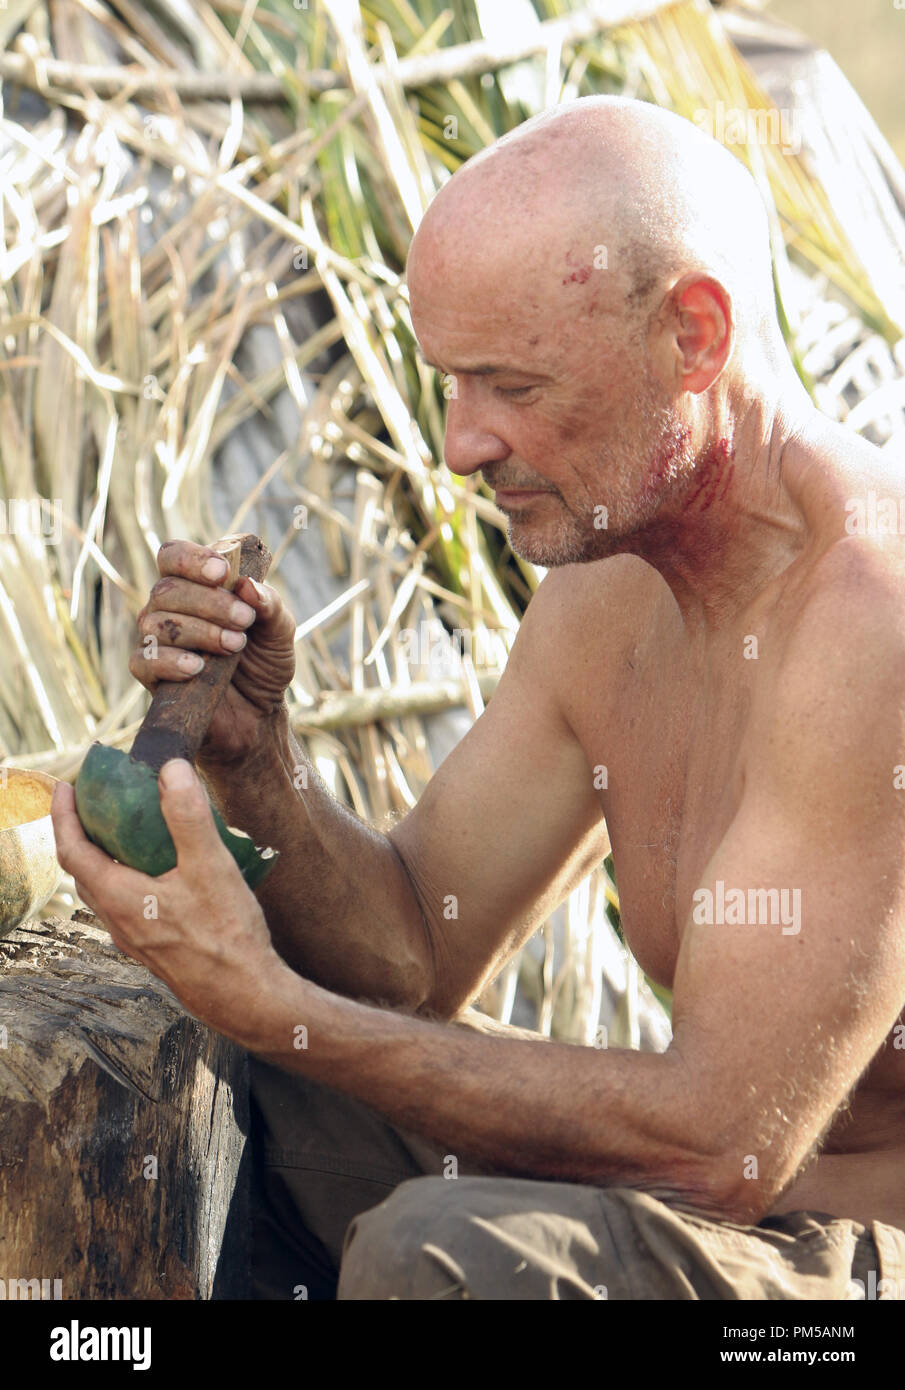 Studio Publicity Still from 'Lost' (Episode Name: Further Instructions) Terry O'Quinn 2006 Photo credit: Mario Perez  File Reference # 307371974THA  For Editorial Use Only -  All Rights Reserved Stock Photo